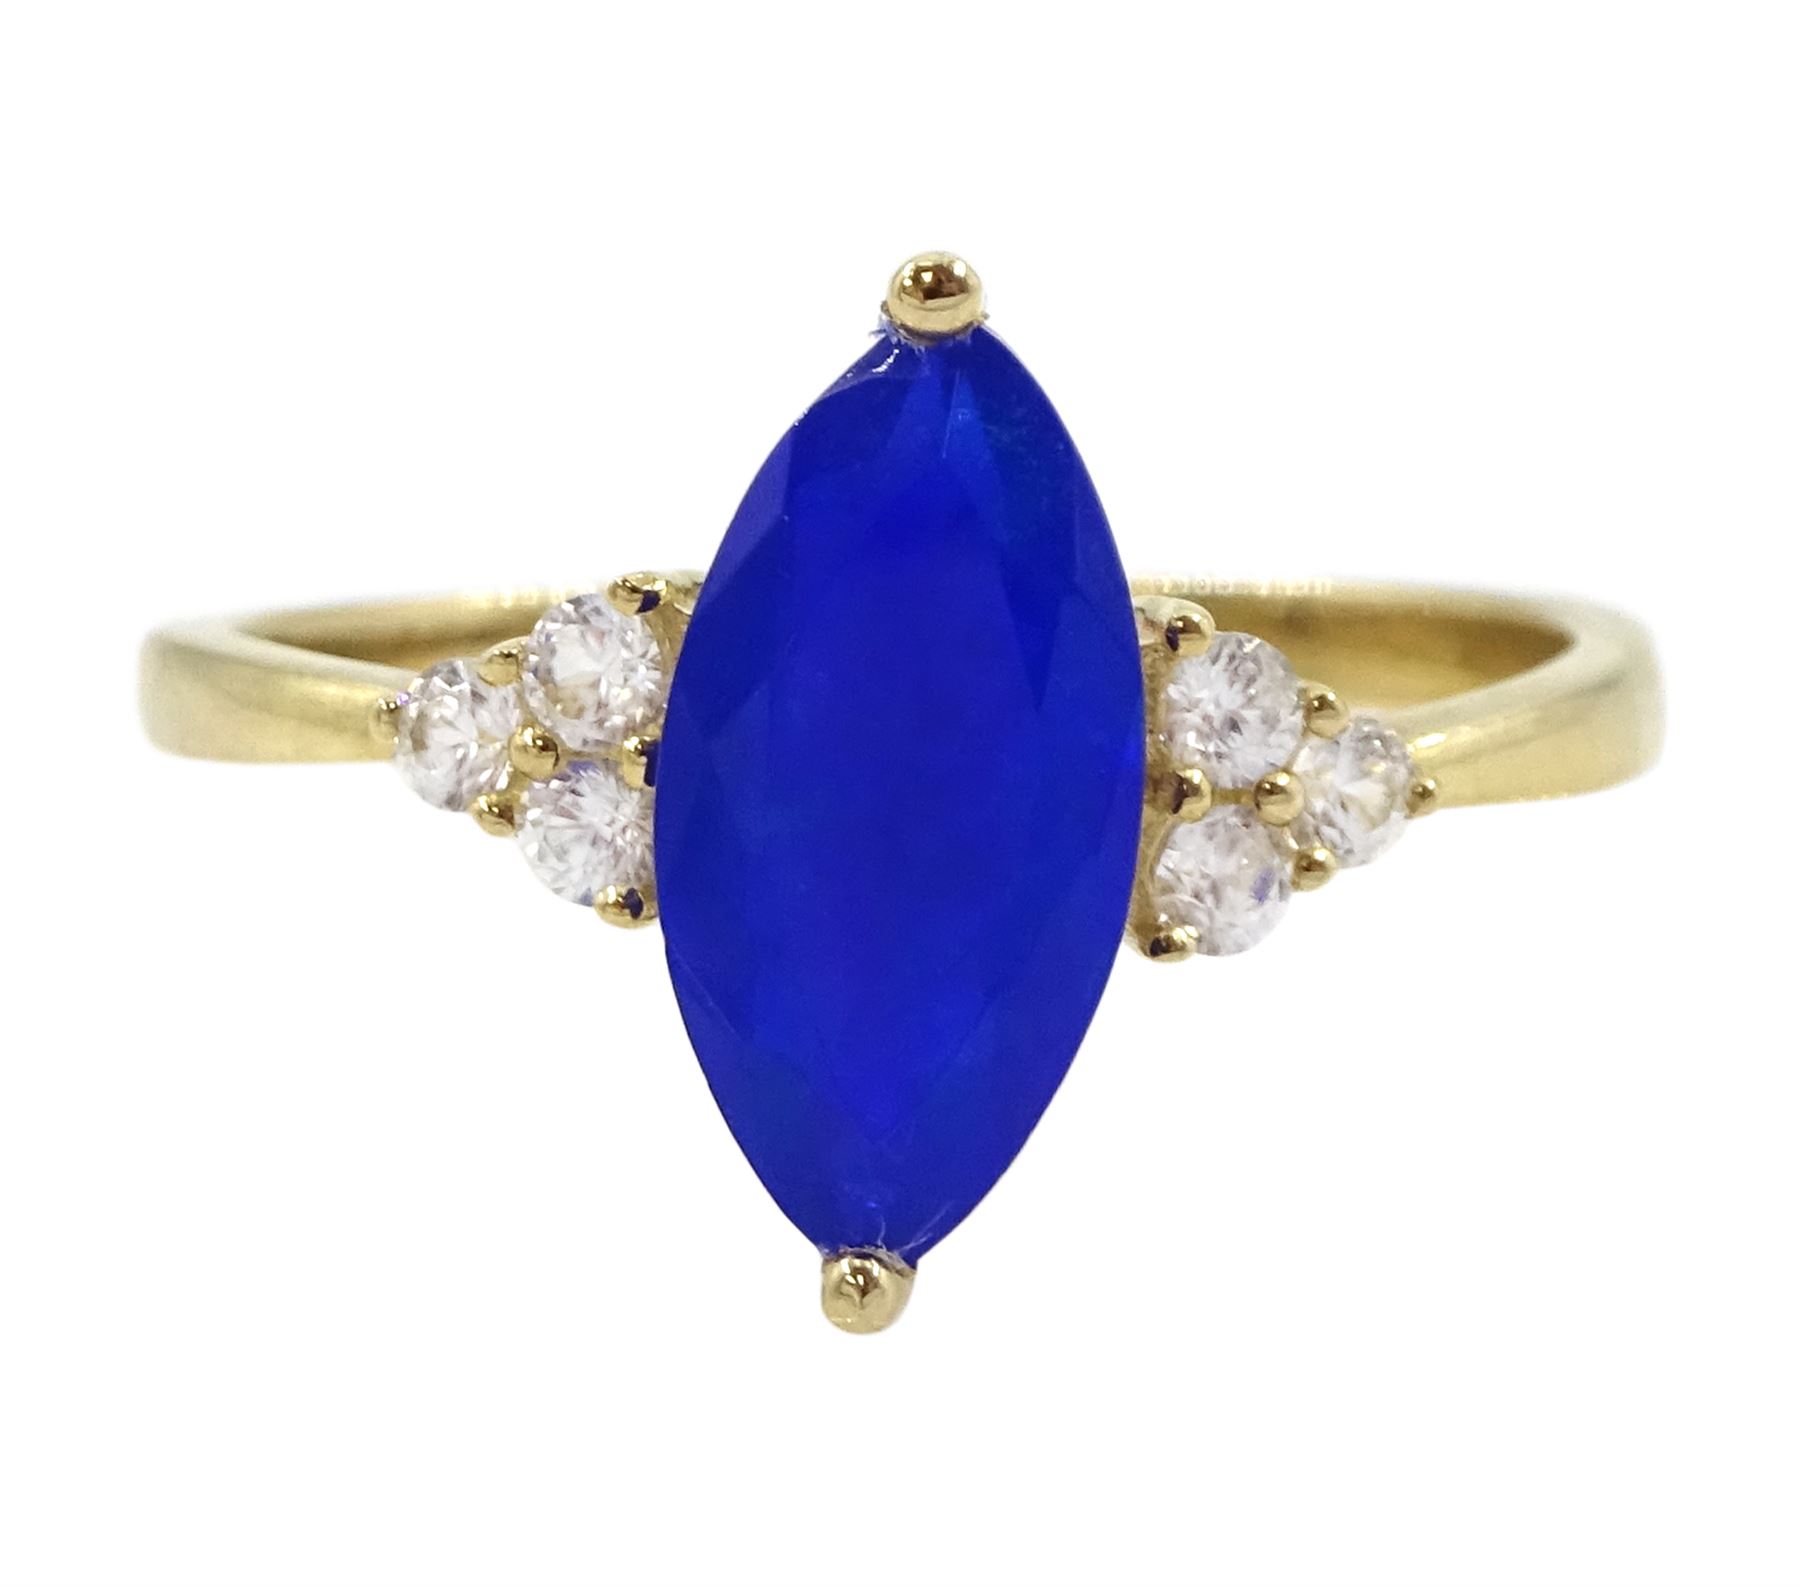 9ct gold marquise cut opal and white zircon ring - Image 5 of 5